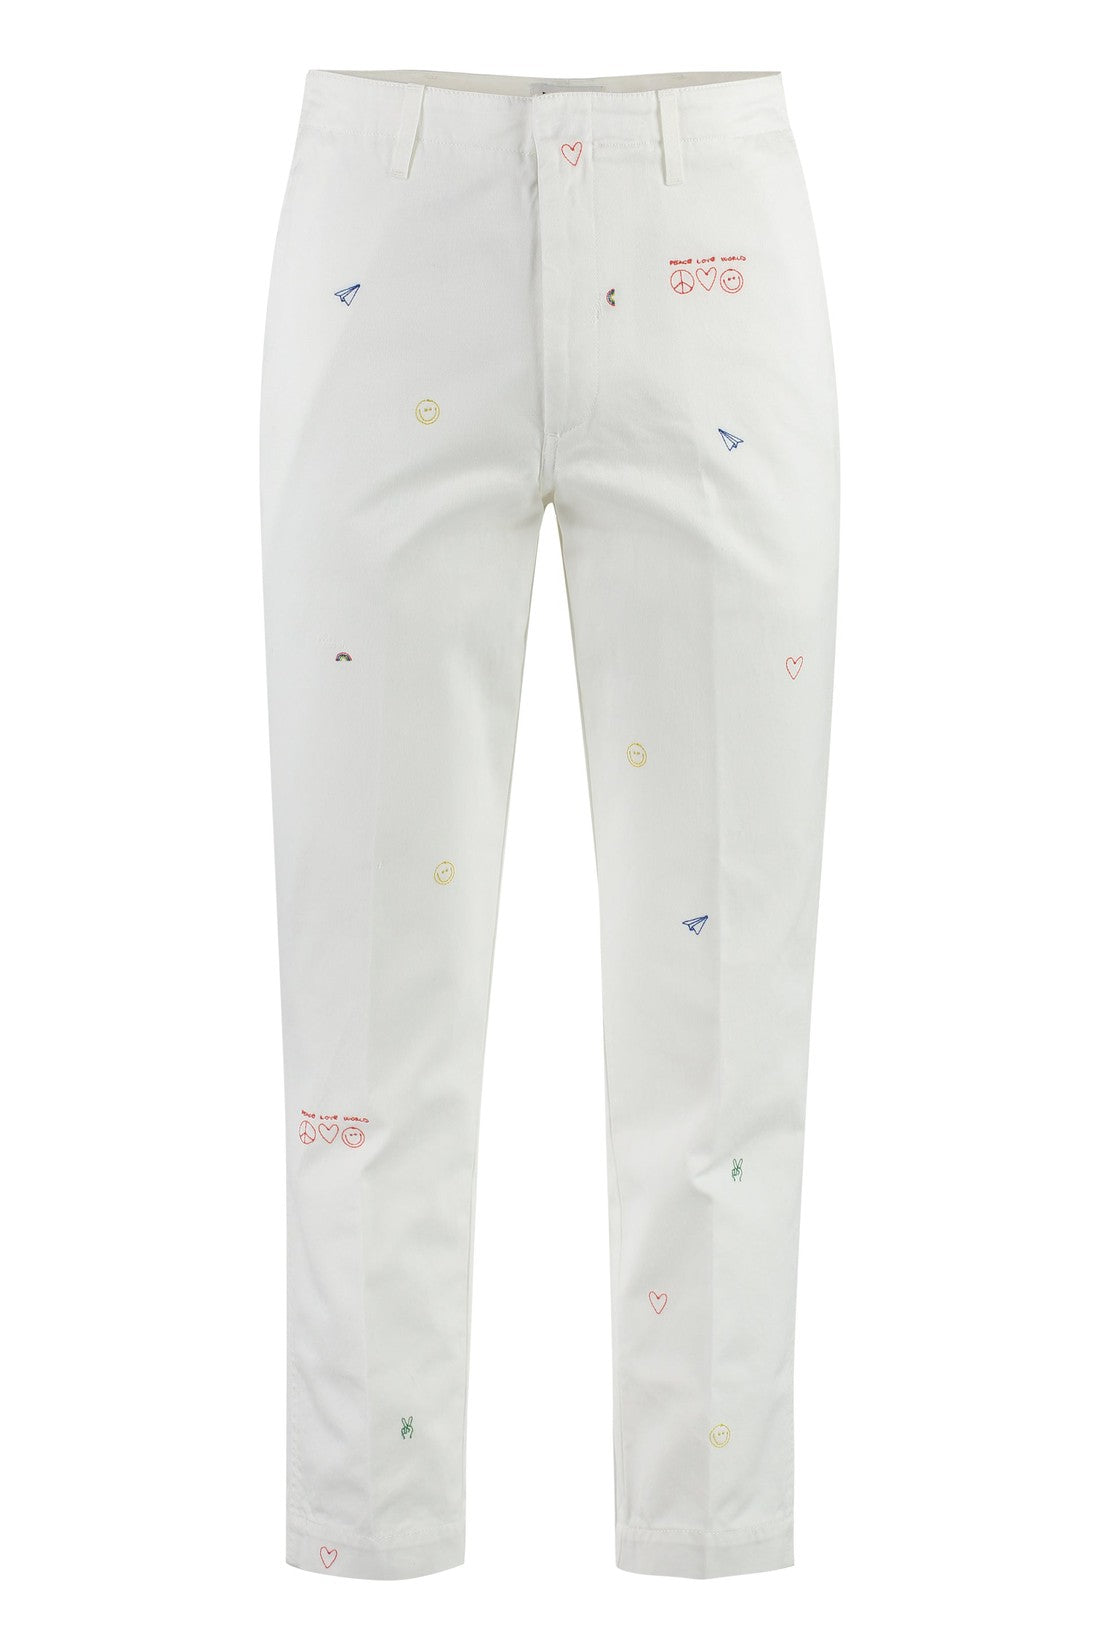 Dondup-OUTLET-SALE-Cotton Chino trousers-ARCHIVIST